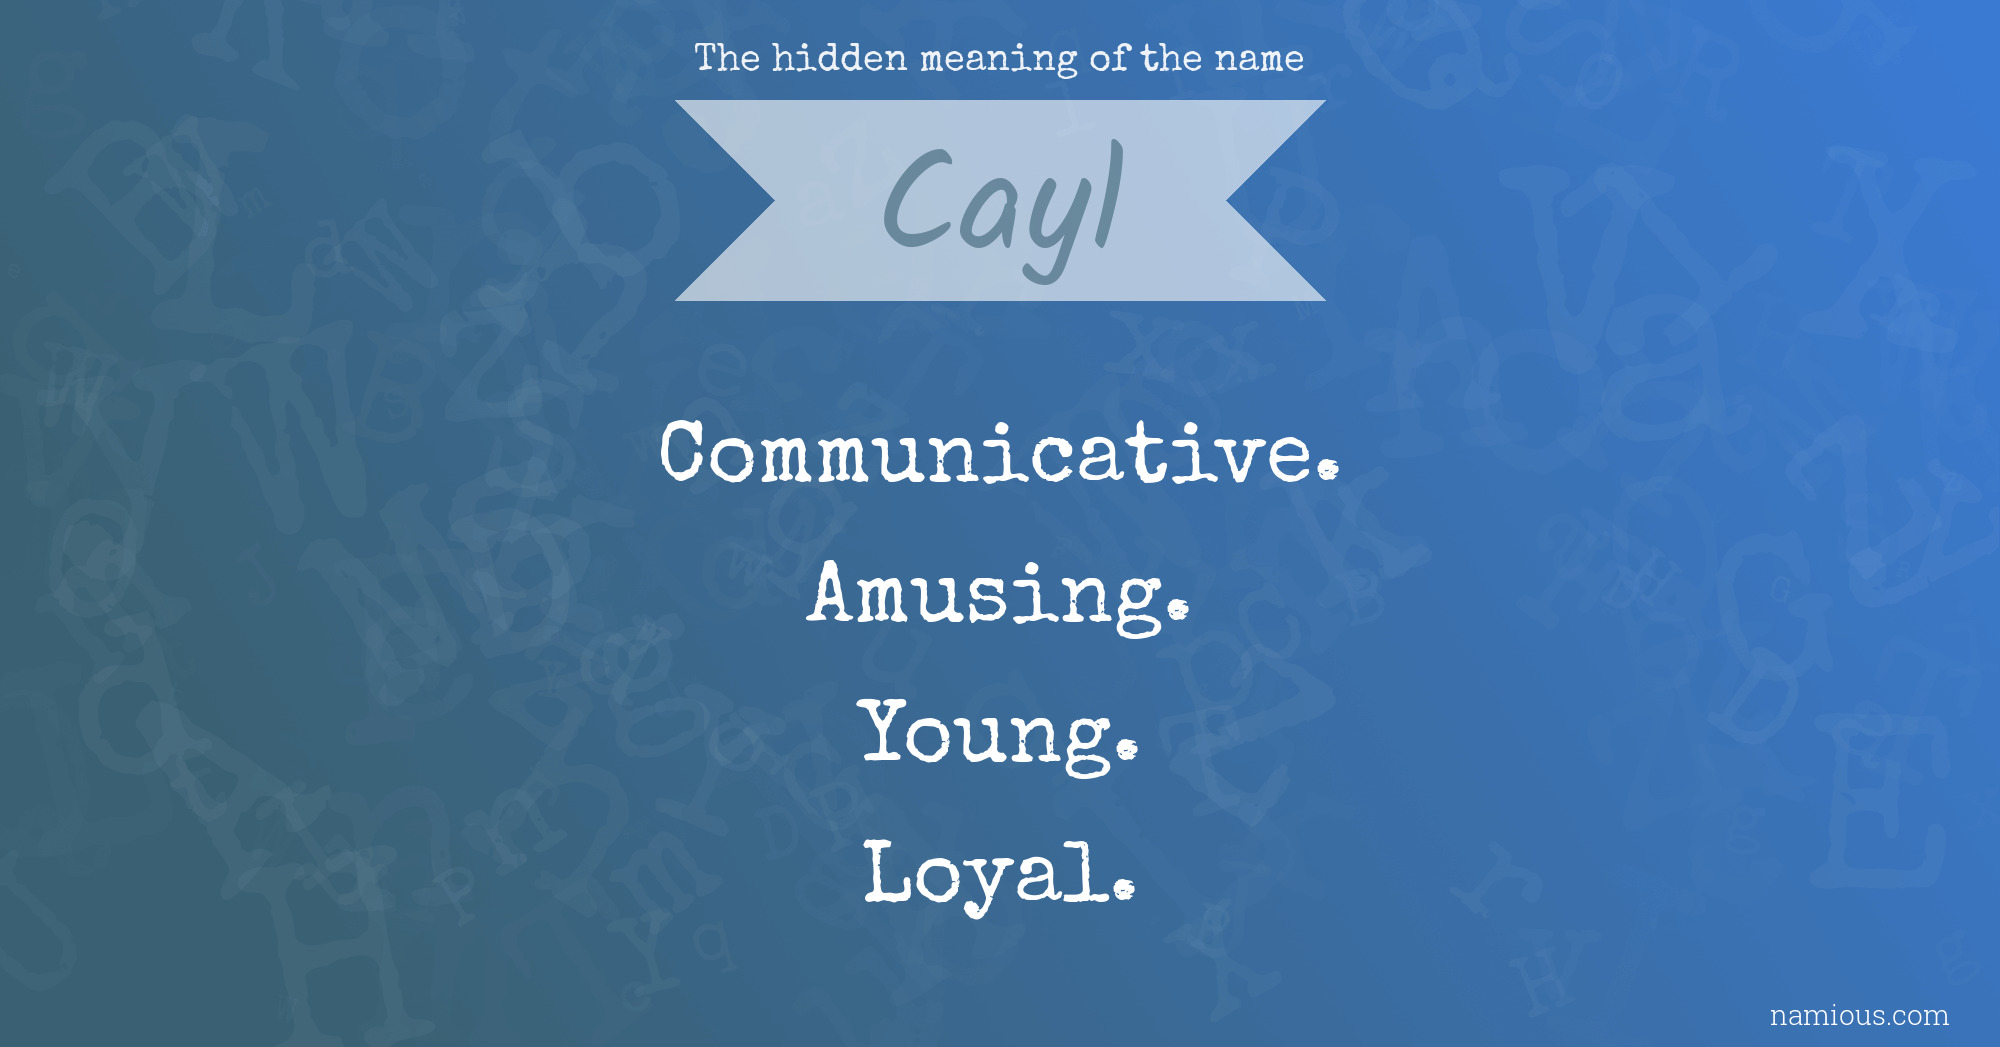 The hidden meaning of the name Cayl